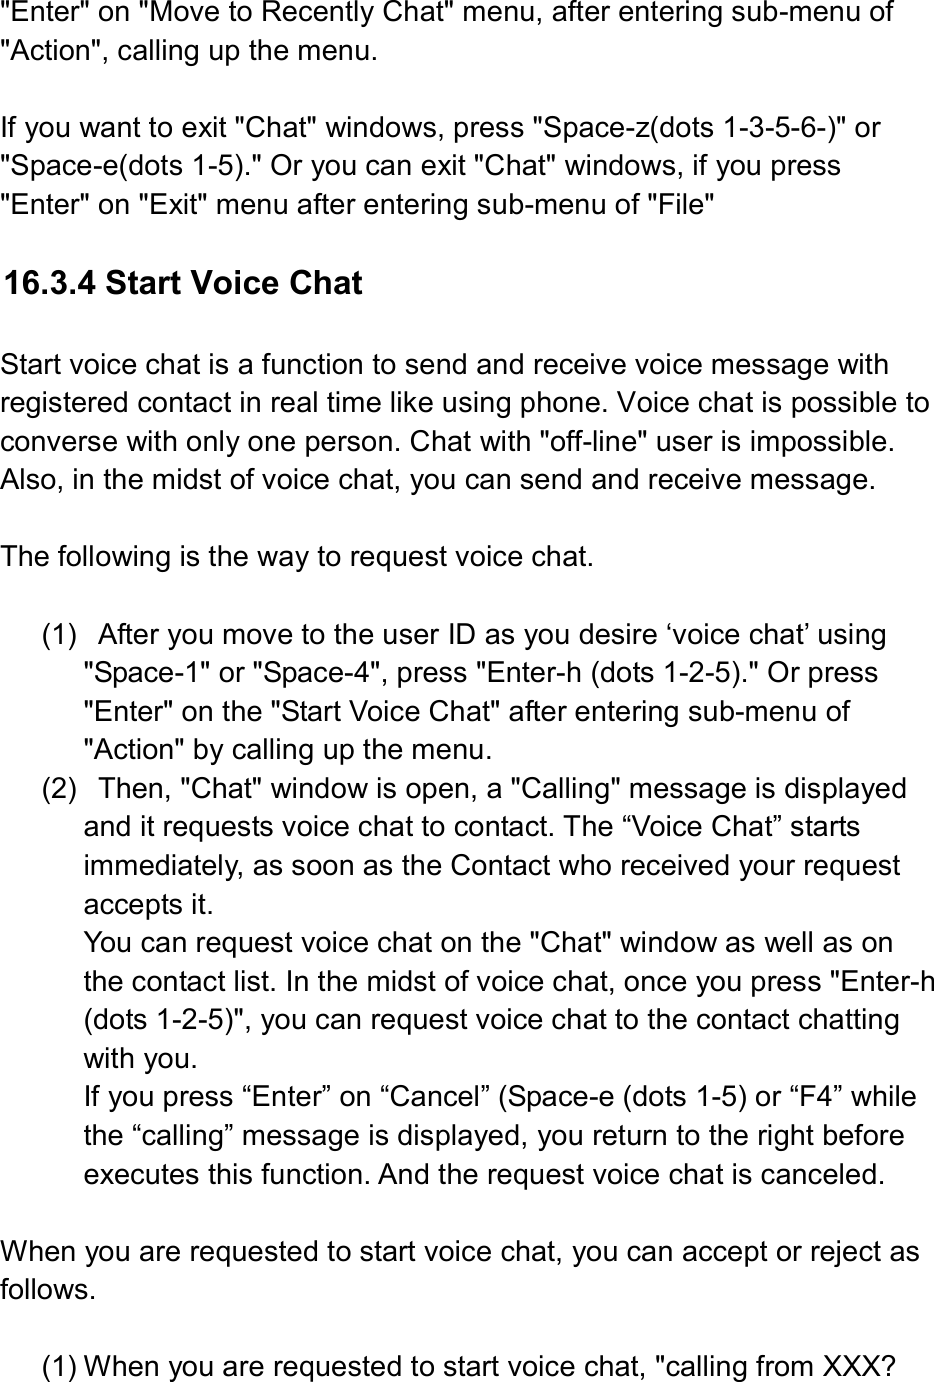  &quot;Enter&quot; on &quot;Move to Recently Chat&quot; menu, after entering sub-menu of &quot;Action&quot;, calling up the menu.    If you want to exit &quot;Chat&quot; windows, press &quot;Space-z(dots 1-3-5-6-)&quot; or &quot;Space-e(dots 1-5).&quot; Or you can exit &quot;Chat&quot; windows, if you press &quot;Enter&quot; on &quot;Exit&quot; menu after entering sub-menu of &quot;File&quot;    16.3.4 Start Voice Chat  Start voice chat is a function to send and receive voice message with registered contact in real time like using phone. Voice chat is possible to converse with only one person. Chat with &quot;off-line&quot; user is impossible. Also, in the midst of voice chat, you can send and receive message.    The following is the way to request voice chat.  (1)   After you move to the user ID as you desire ‘voice chat’ using &quot;Space-1&quot; or &quot;Space-4&quot;, press &quot;Enter-h (dots 1-2-5).&quot; Or press &quot;Enter&quot; on the &quot;Start Voice Chat&quot; after entering sub-menu of &quot;Action&quot; by calling up the menu. (2)   Then, &quot;Chat&quot; window is open, a &quot;Calling&quot; message is displayed and it requests voice chat to contact. The “Voice Chat” starts immediately, as soon as the Contact who received your request accepts it. You can request voice chat on the &quot;Chat&quot; window as well as on the contact list. In the midst of voice chat, once you press &quot;Enter-h (dots 1-2-5)&quot;, you can request voice chat to the contact chatting with you.   If you press “Enter” on “Cancel” (Space-e (dots 1-5) or “F4” while the “calling” message is displayed, you return to the right before executes this function. And the request voice chat is canceled.    When you are requested to start voice chat, you can accept or reject as follows.    (1) When you are requested to start voice chat, &quot;calling from XXX? 